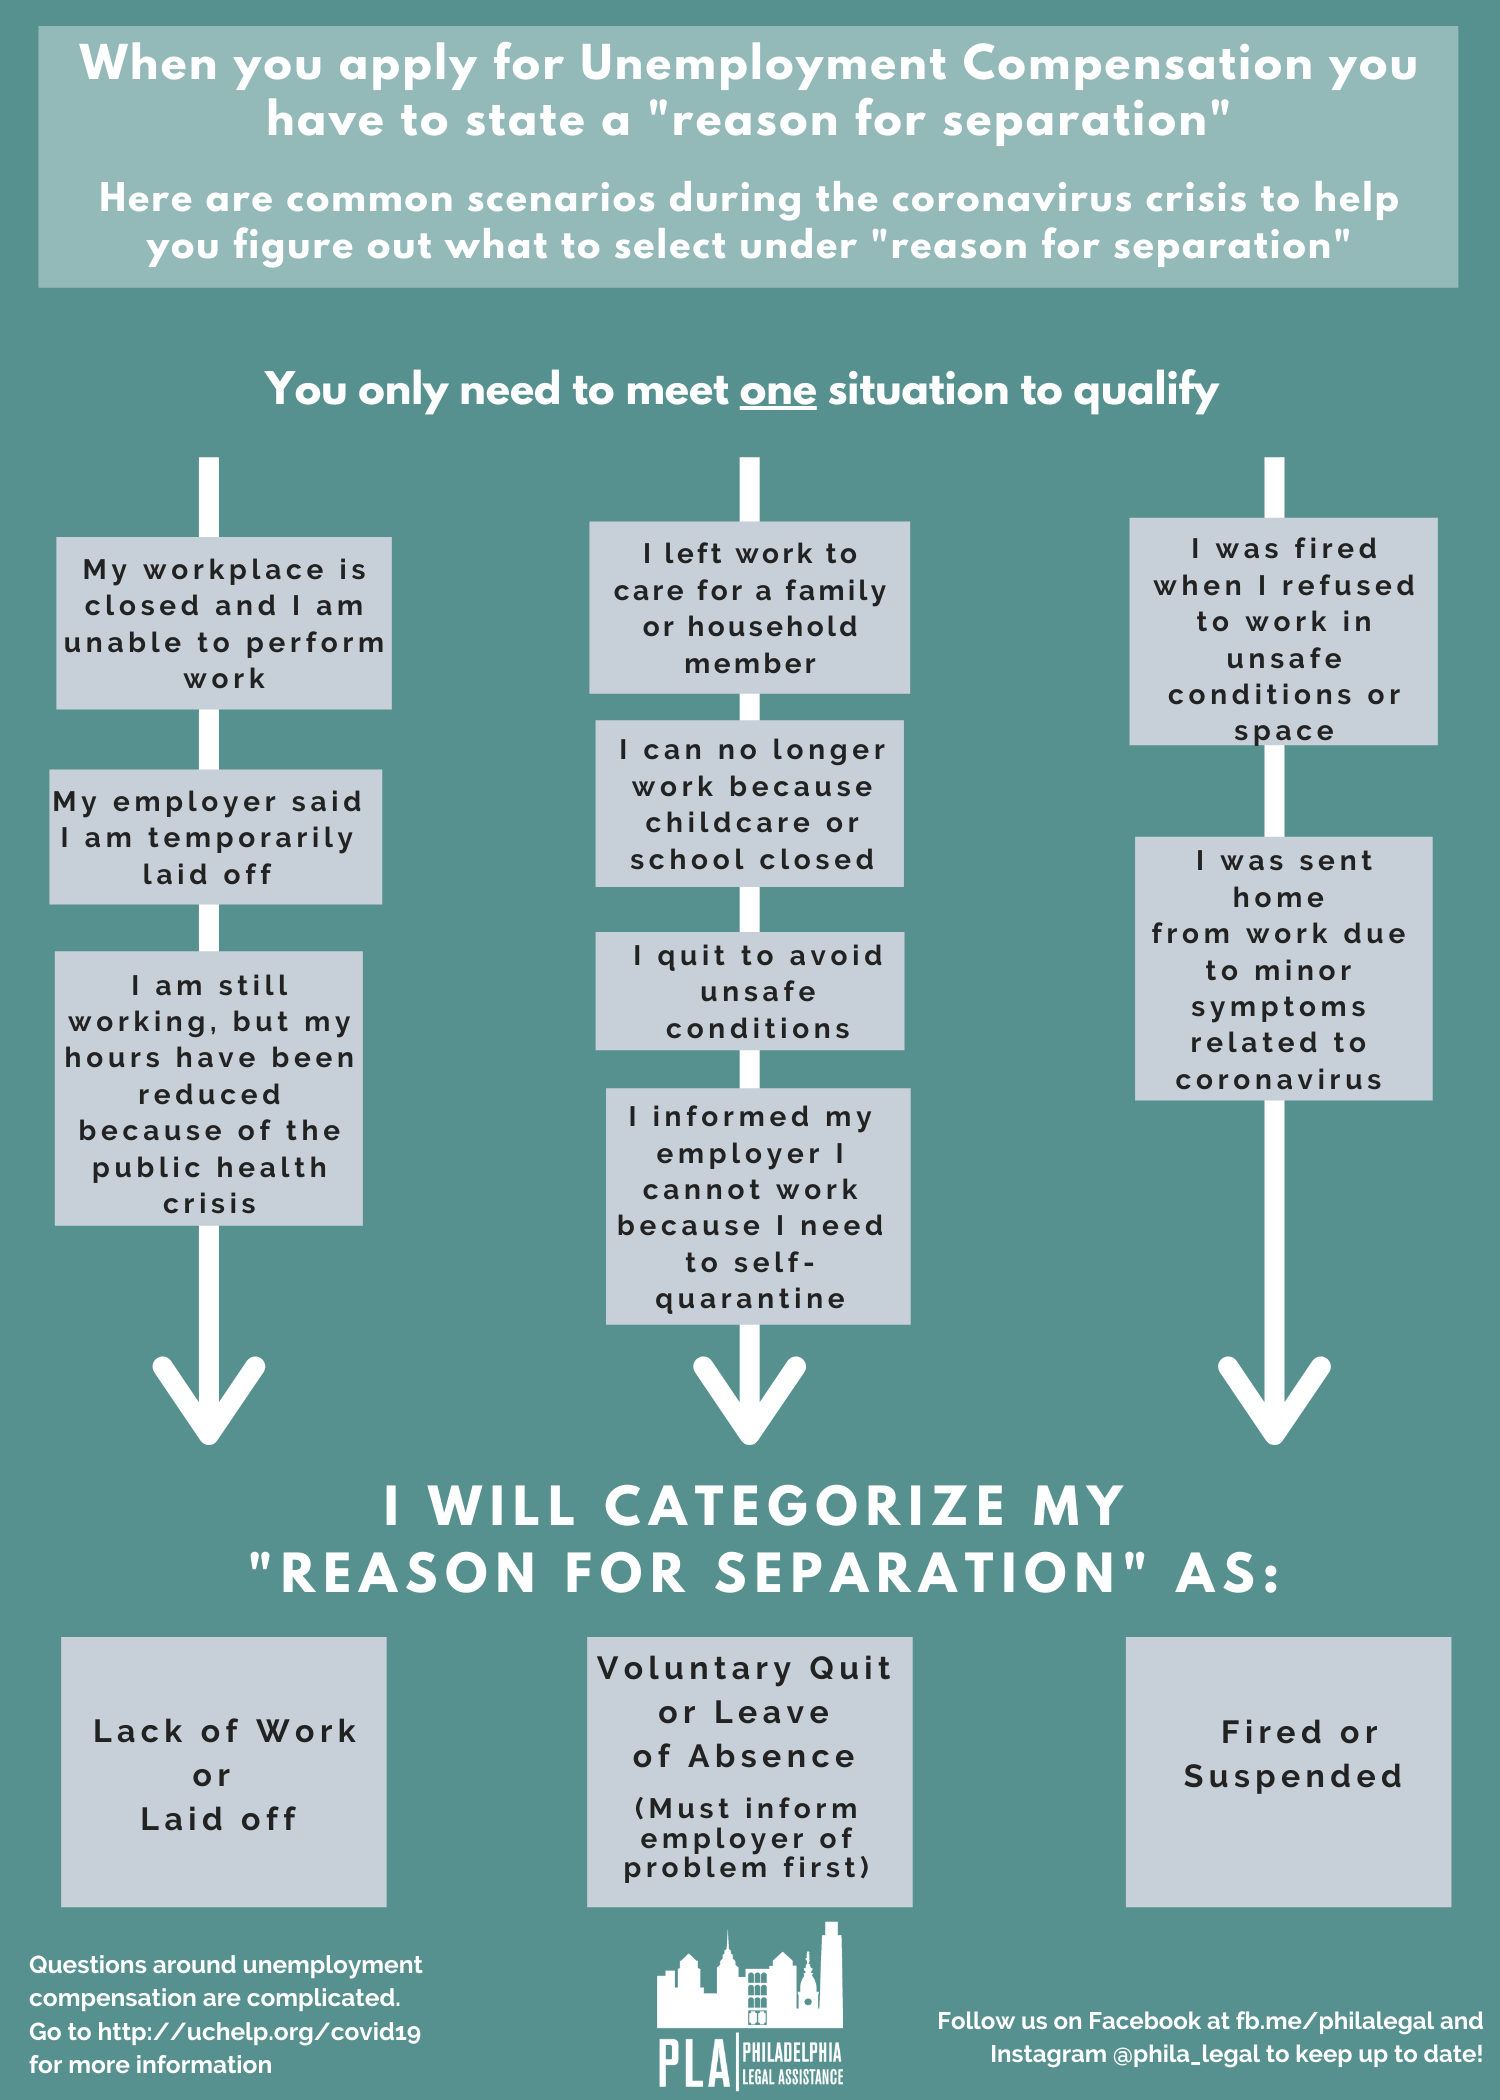 Reason for Separation Flowchart showing the different options for reasons for separation when applying for UC